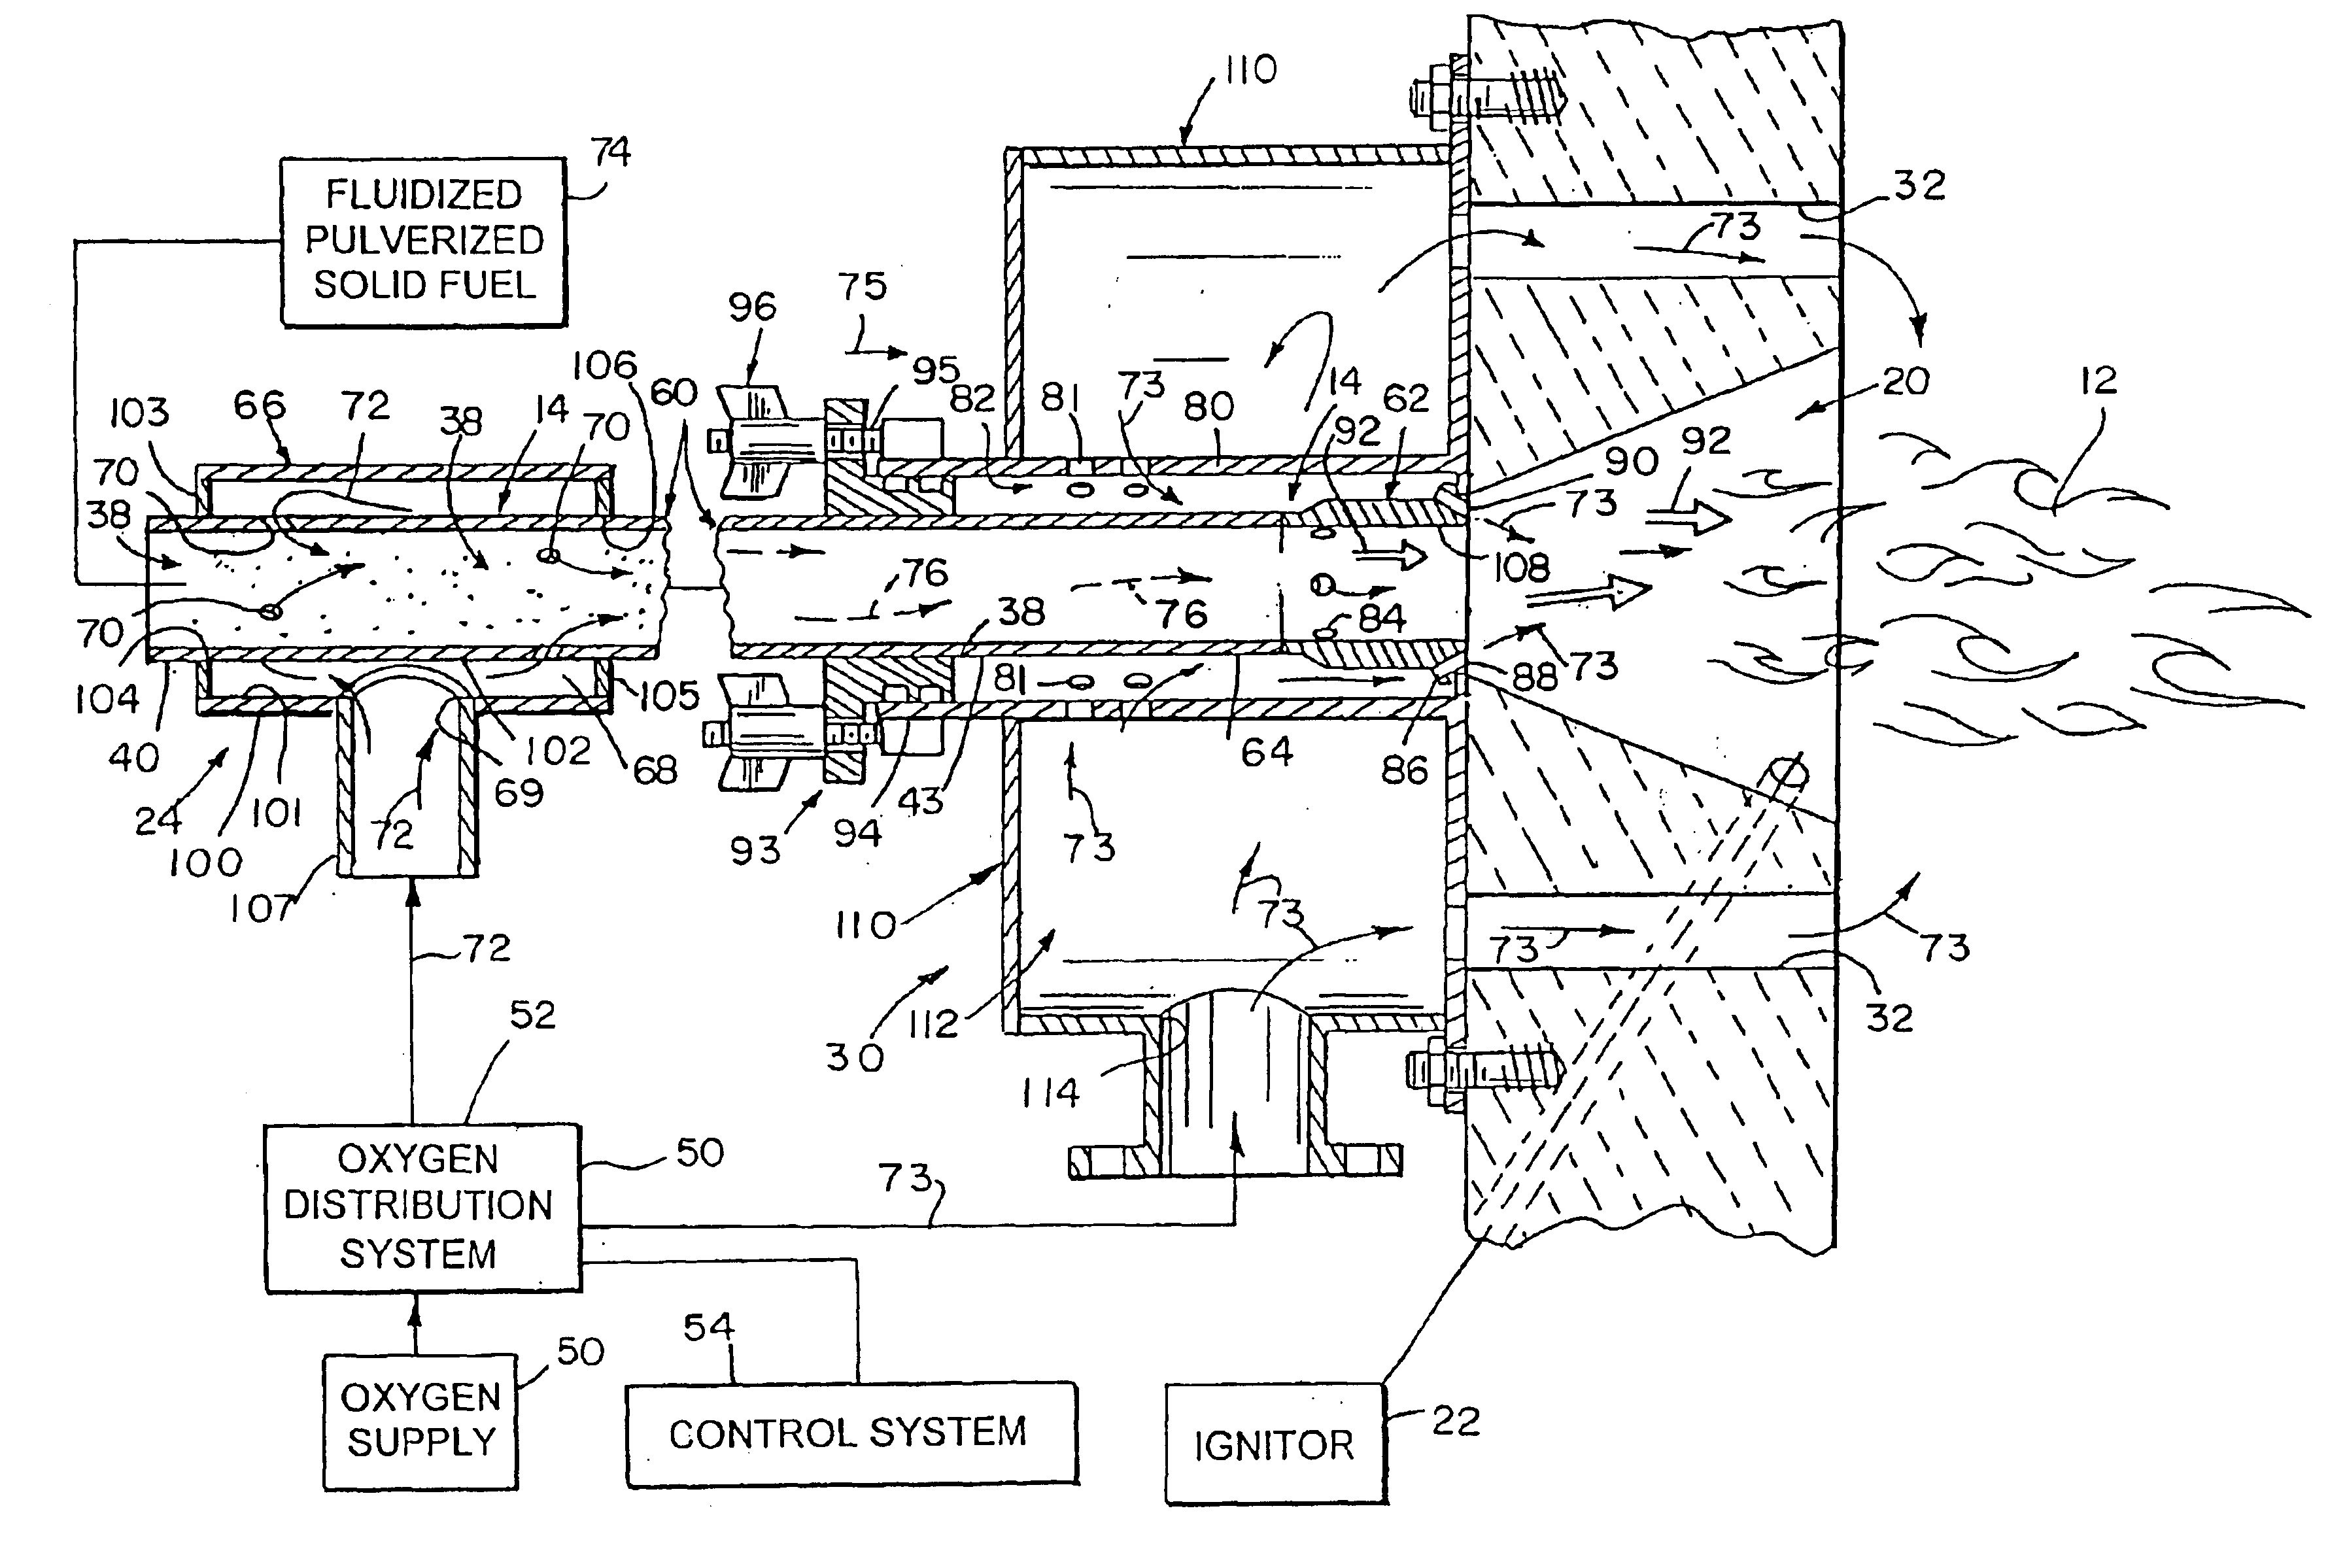 Burner with oxygen and fuel mixing apparatus